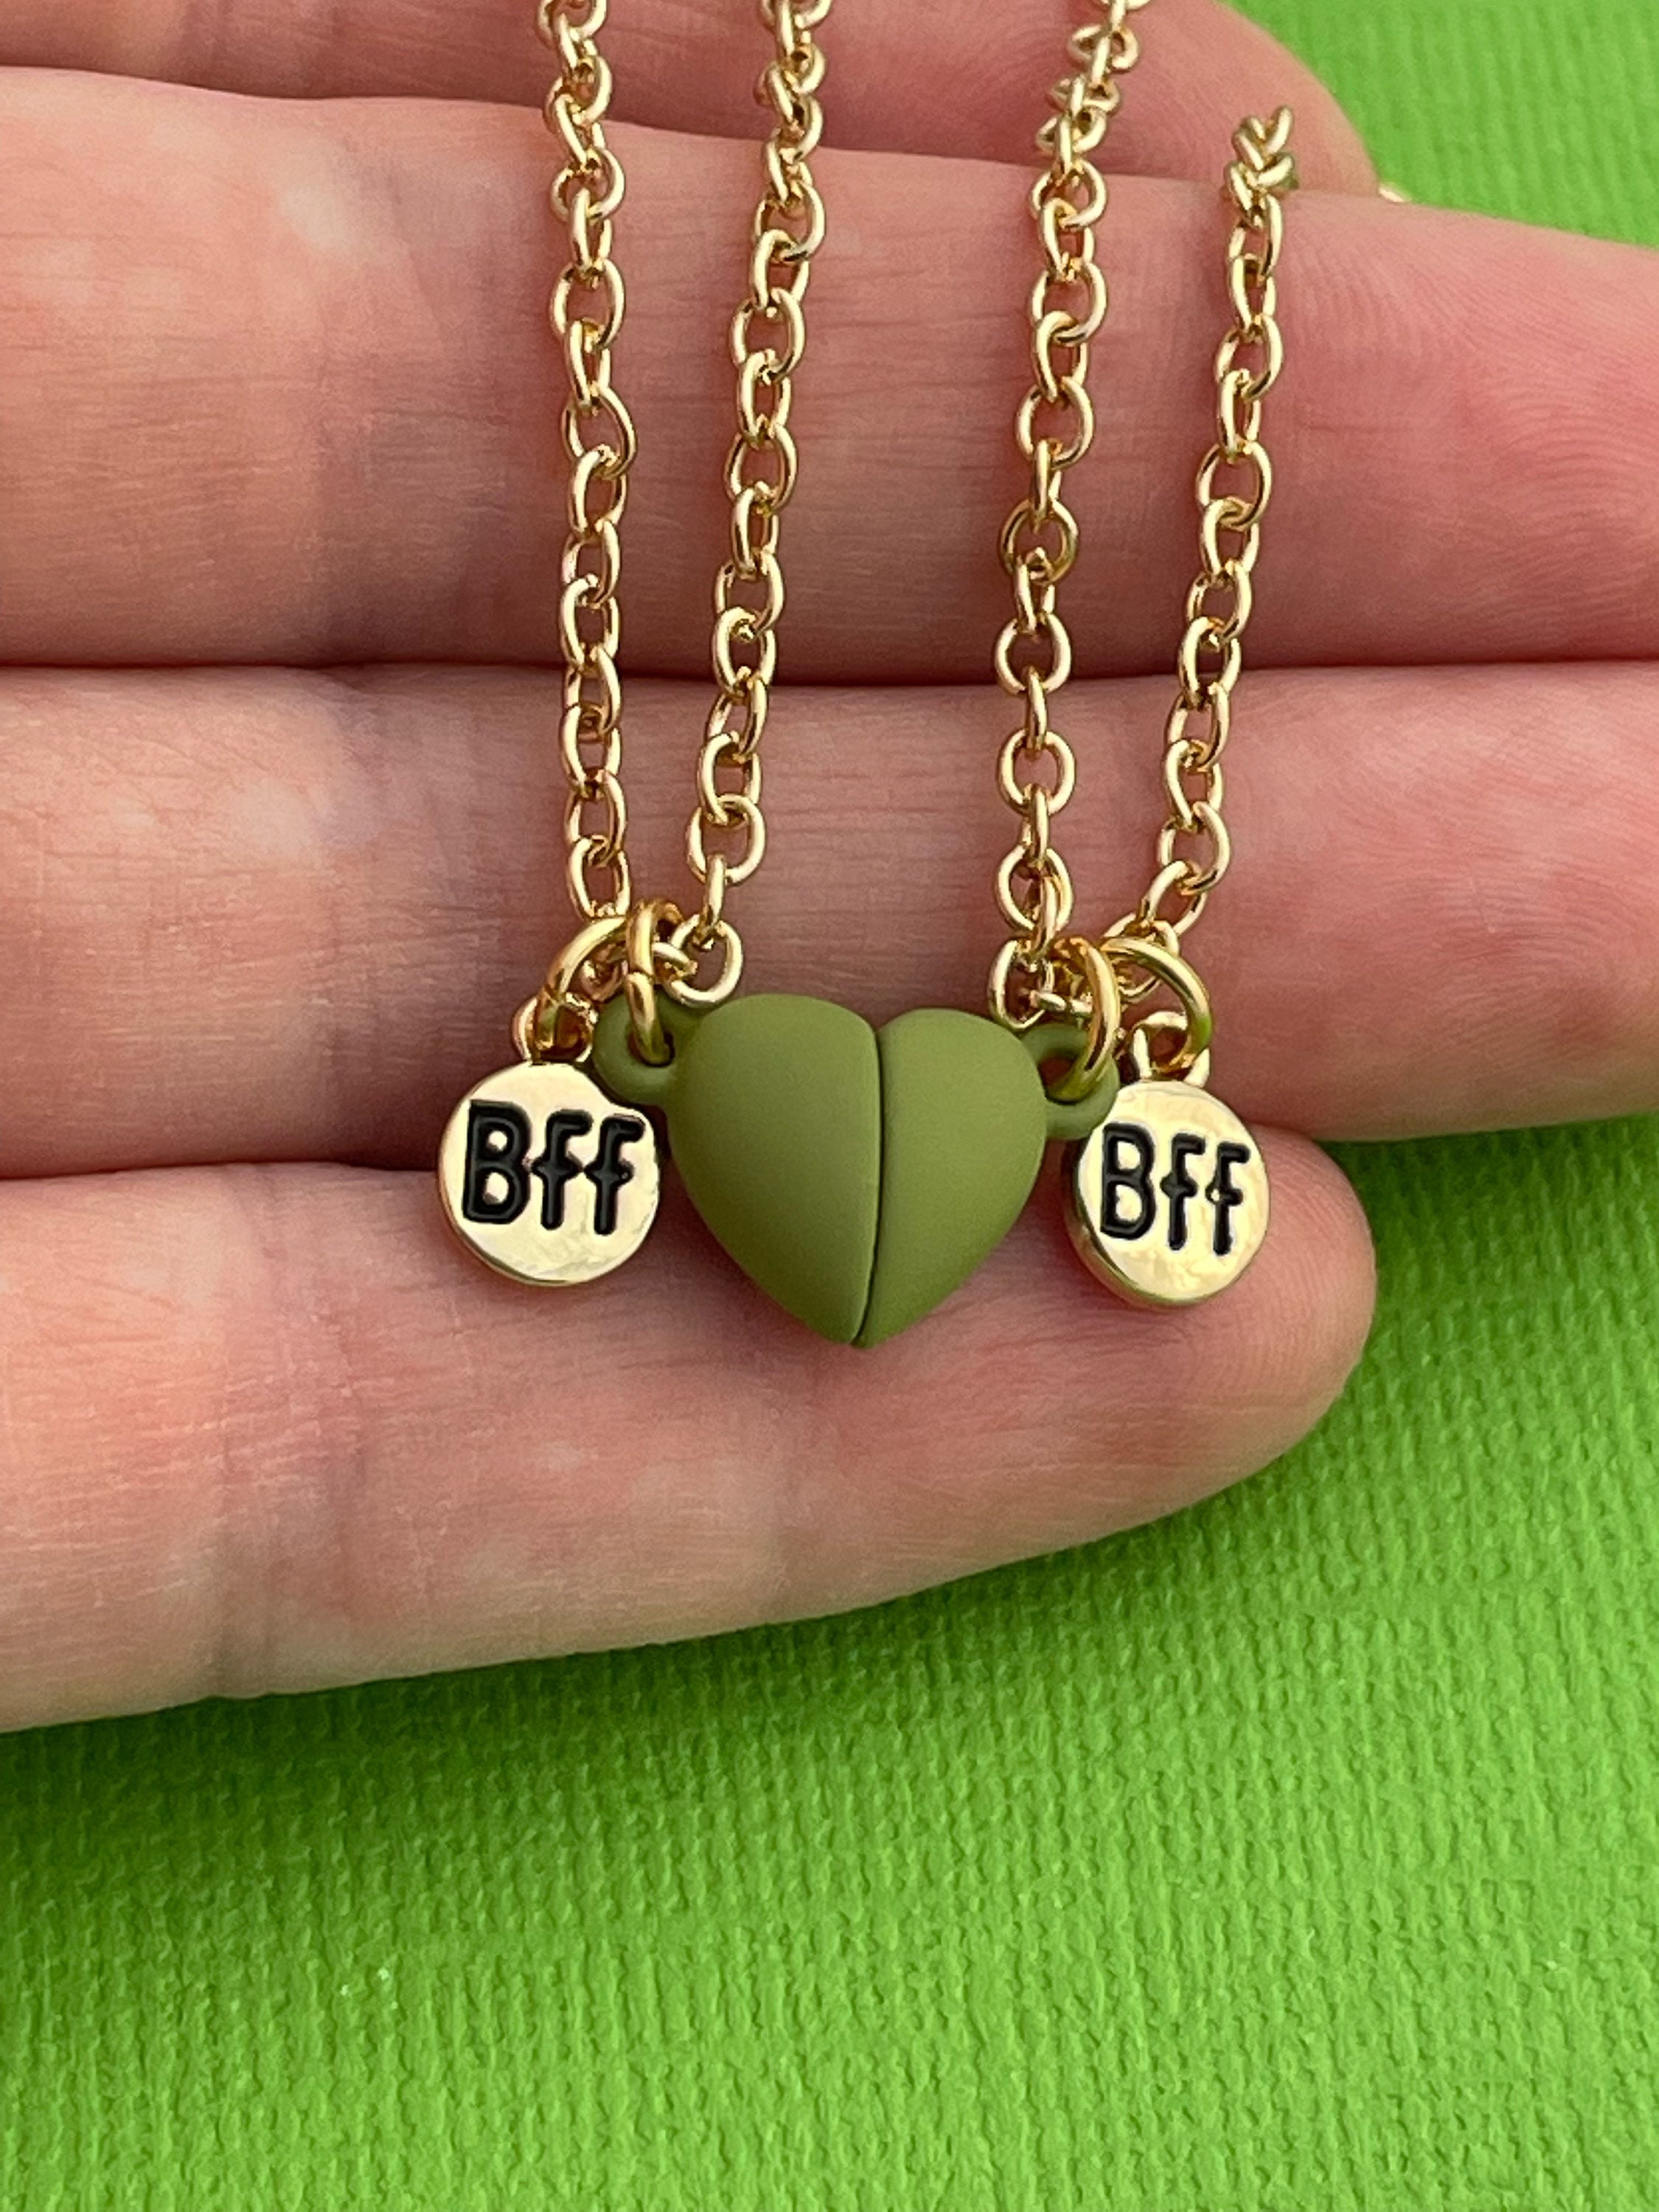 Best Friend Necklace Gifts Magnetic Matching Friendship Necklace for 2  Girls BFF